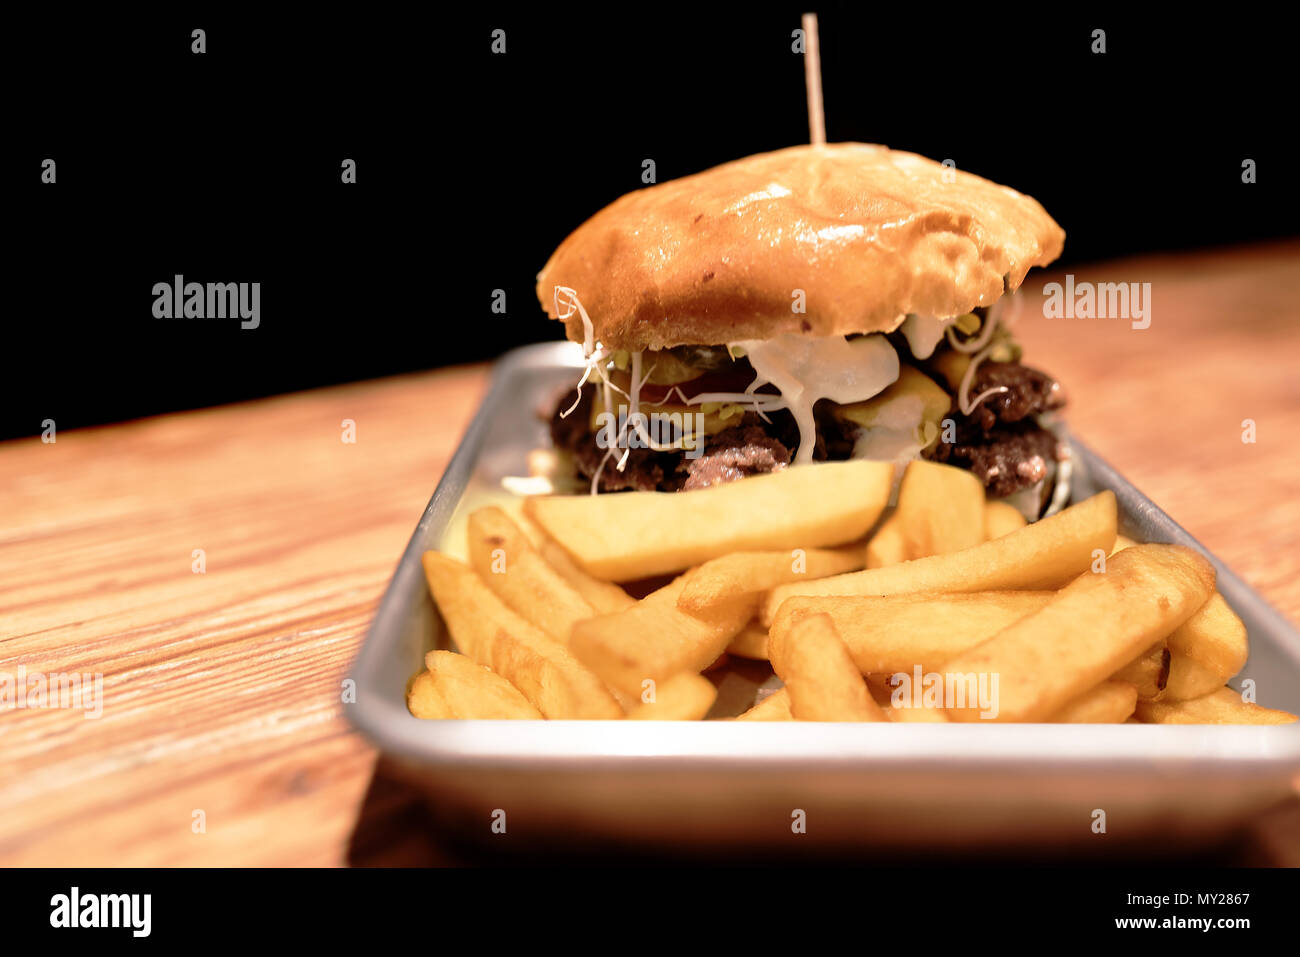 large burger and french fries on metal plate on rustic wooden table against dark background Stock Photo